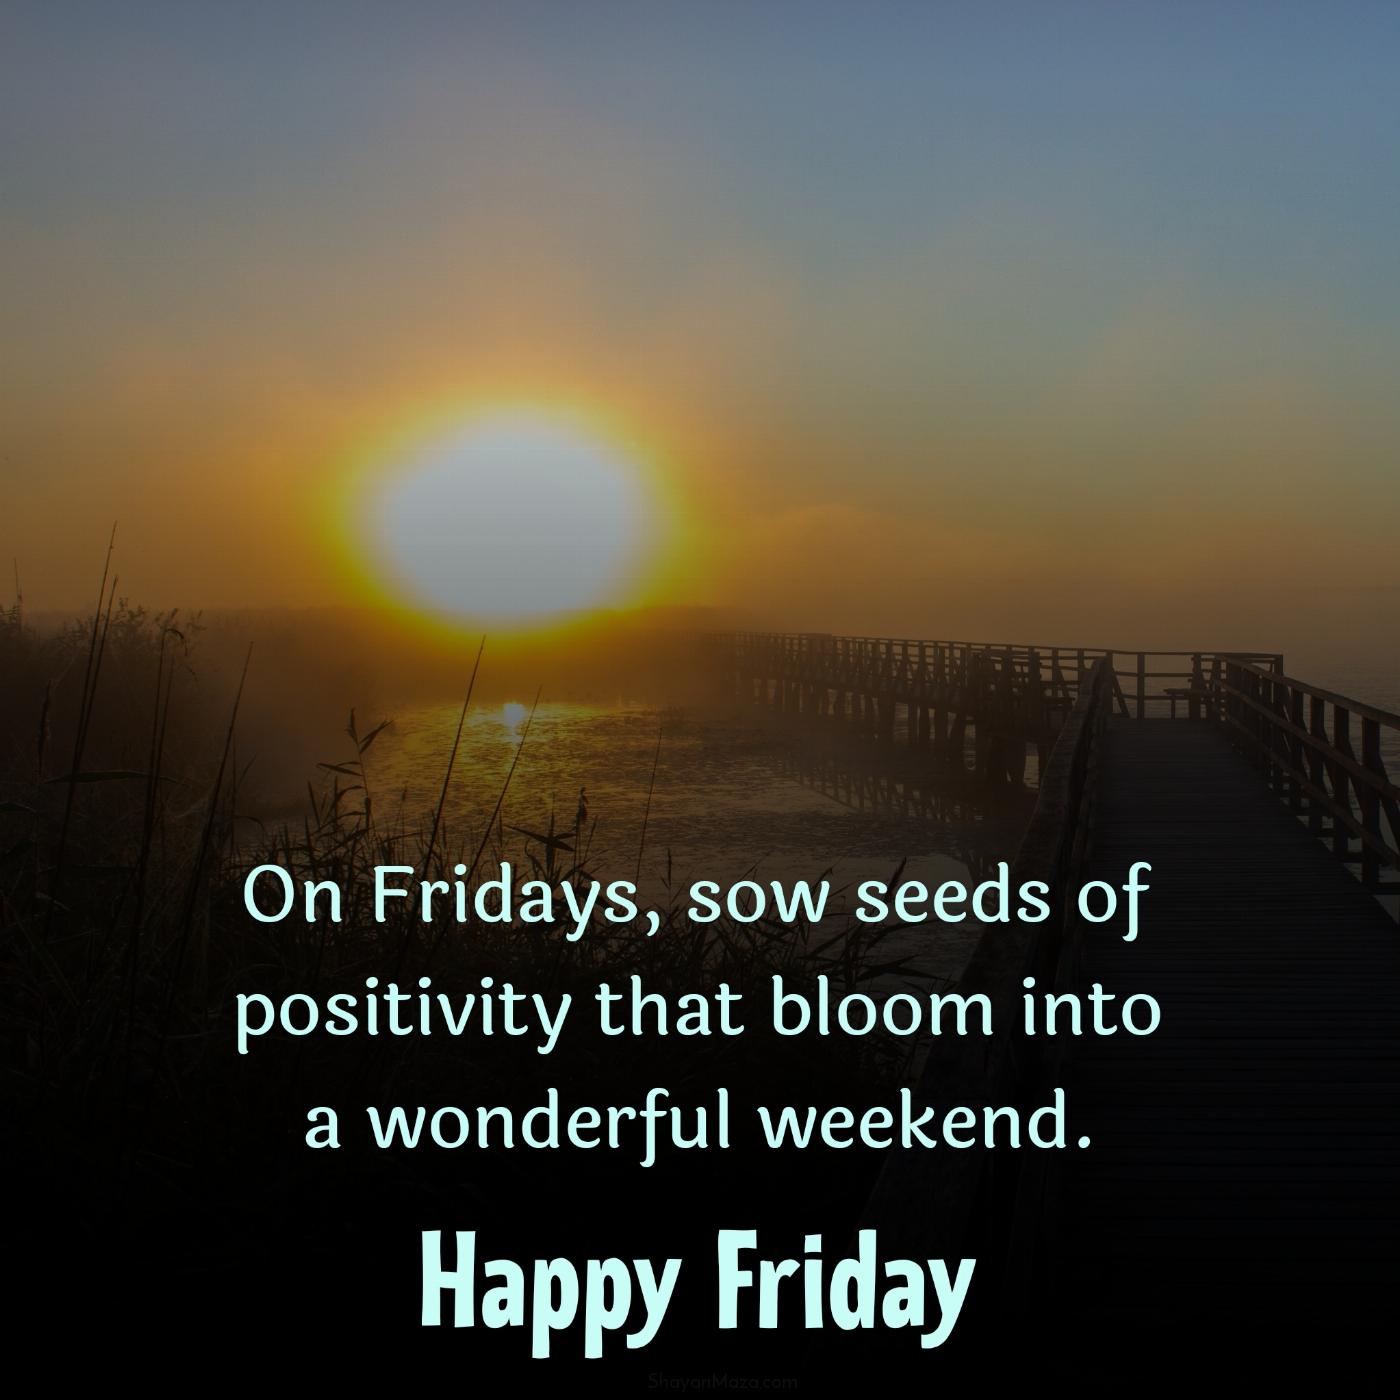 On Fridays sow seeds of positivity that bloom into a wonderful weekend